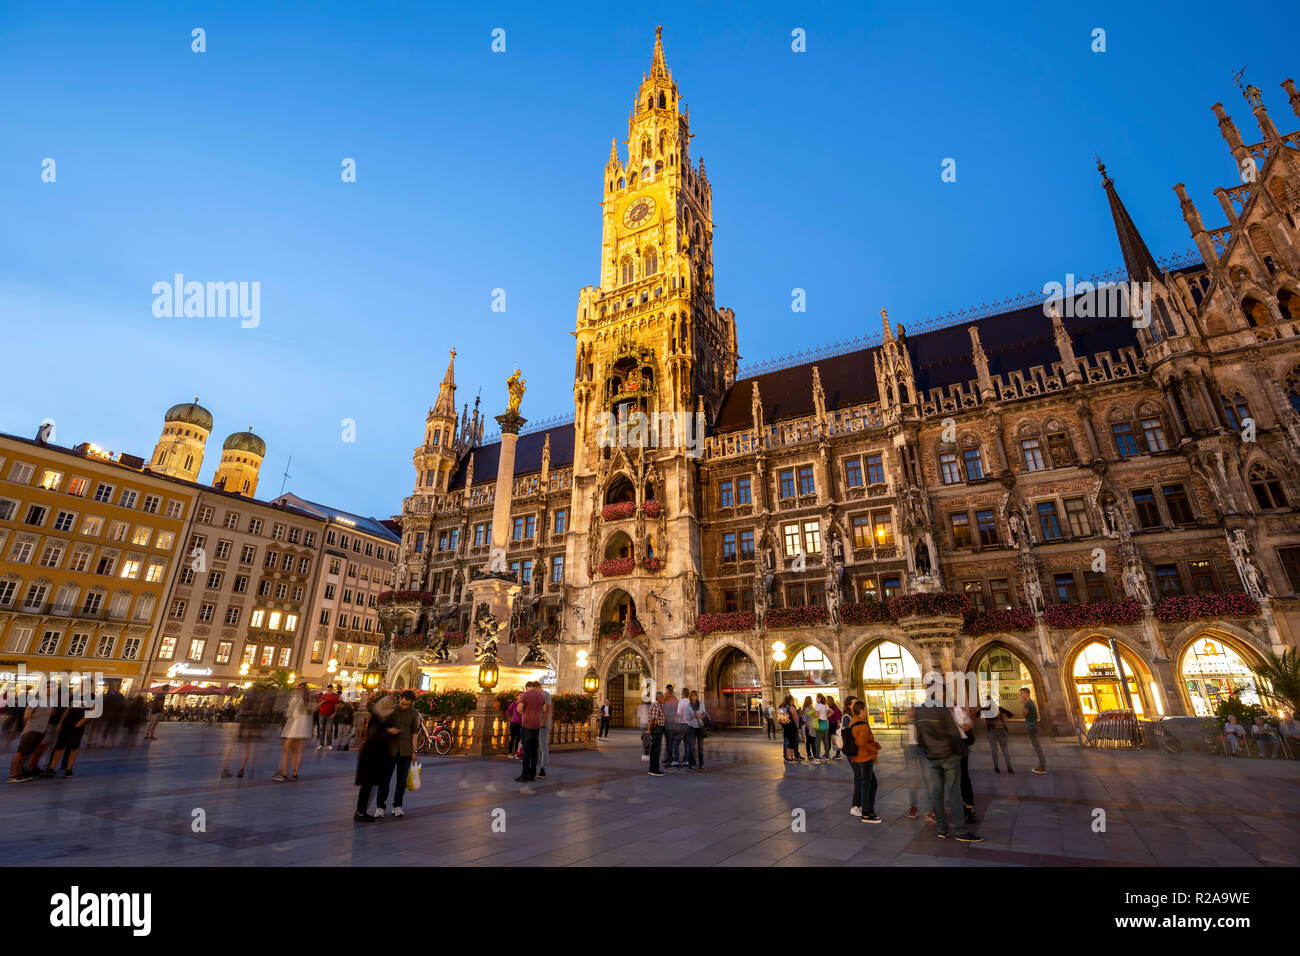 New Town Hall (featuring clock tower and Glockenspiel) and crowd (domed towers of Frauenkirche at left), Marienplatz, Munich, Germany Stock Photo